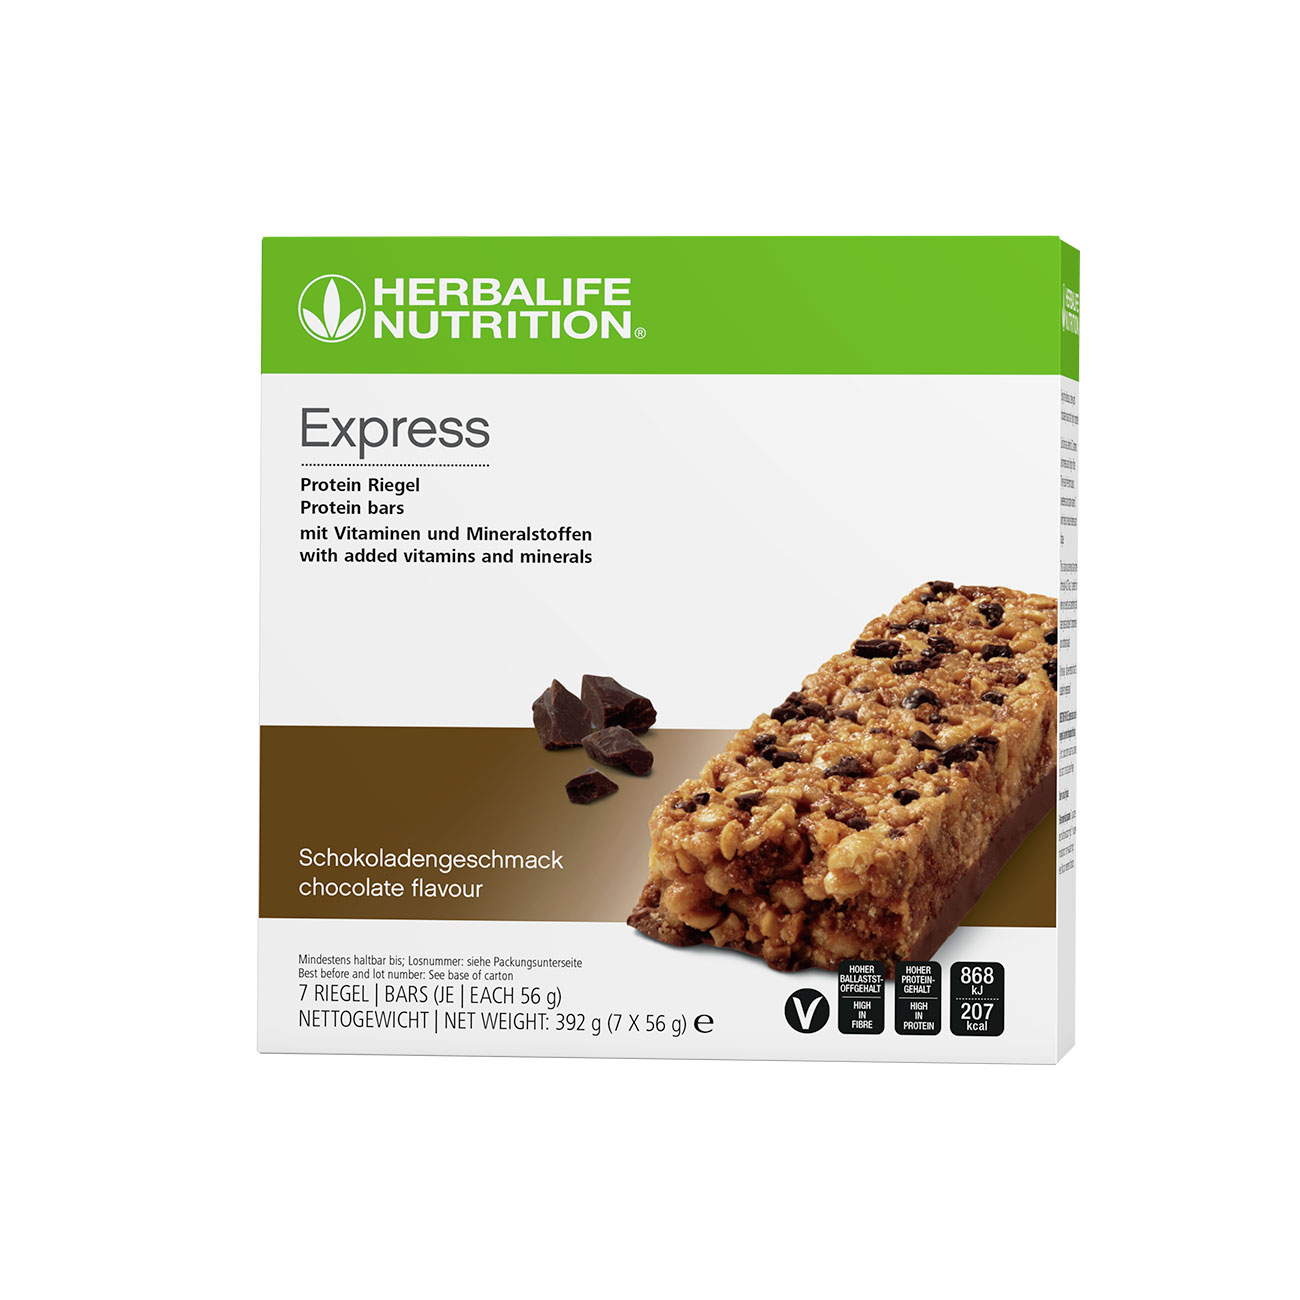 Express Protein Bars  Chocolate product shot.